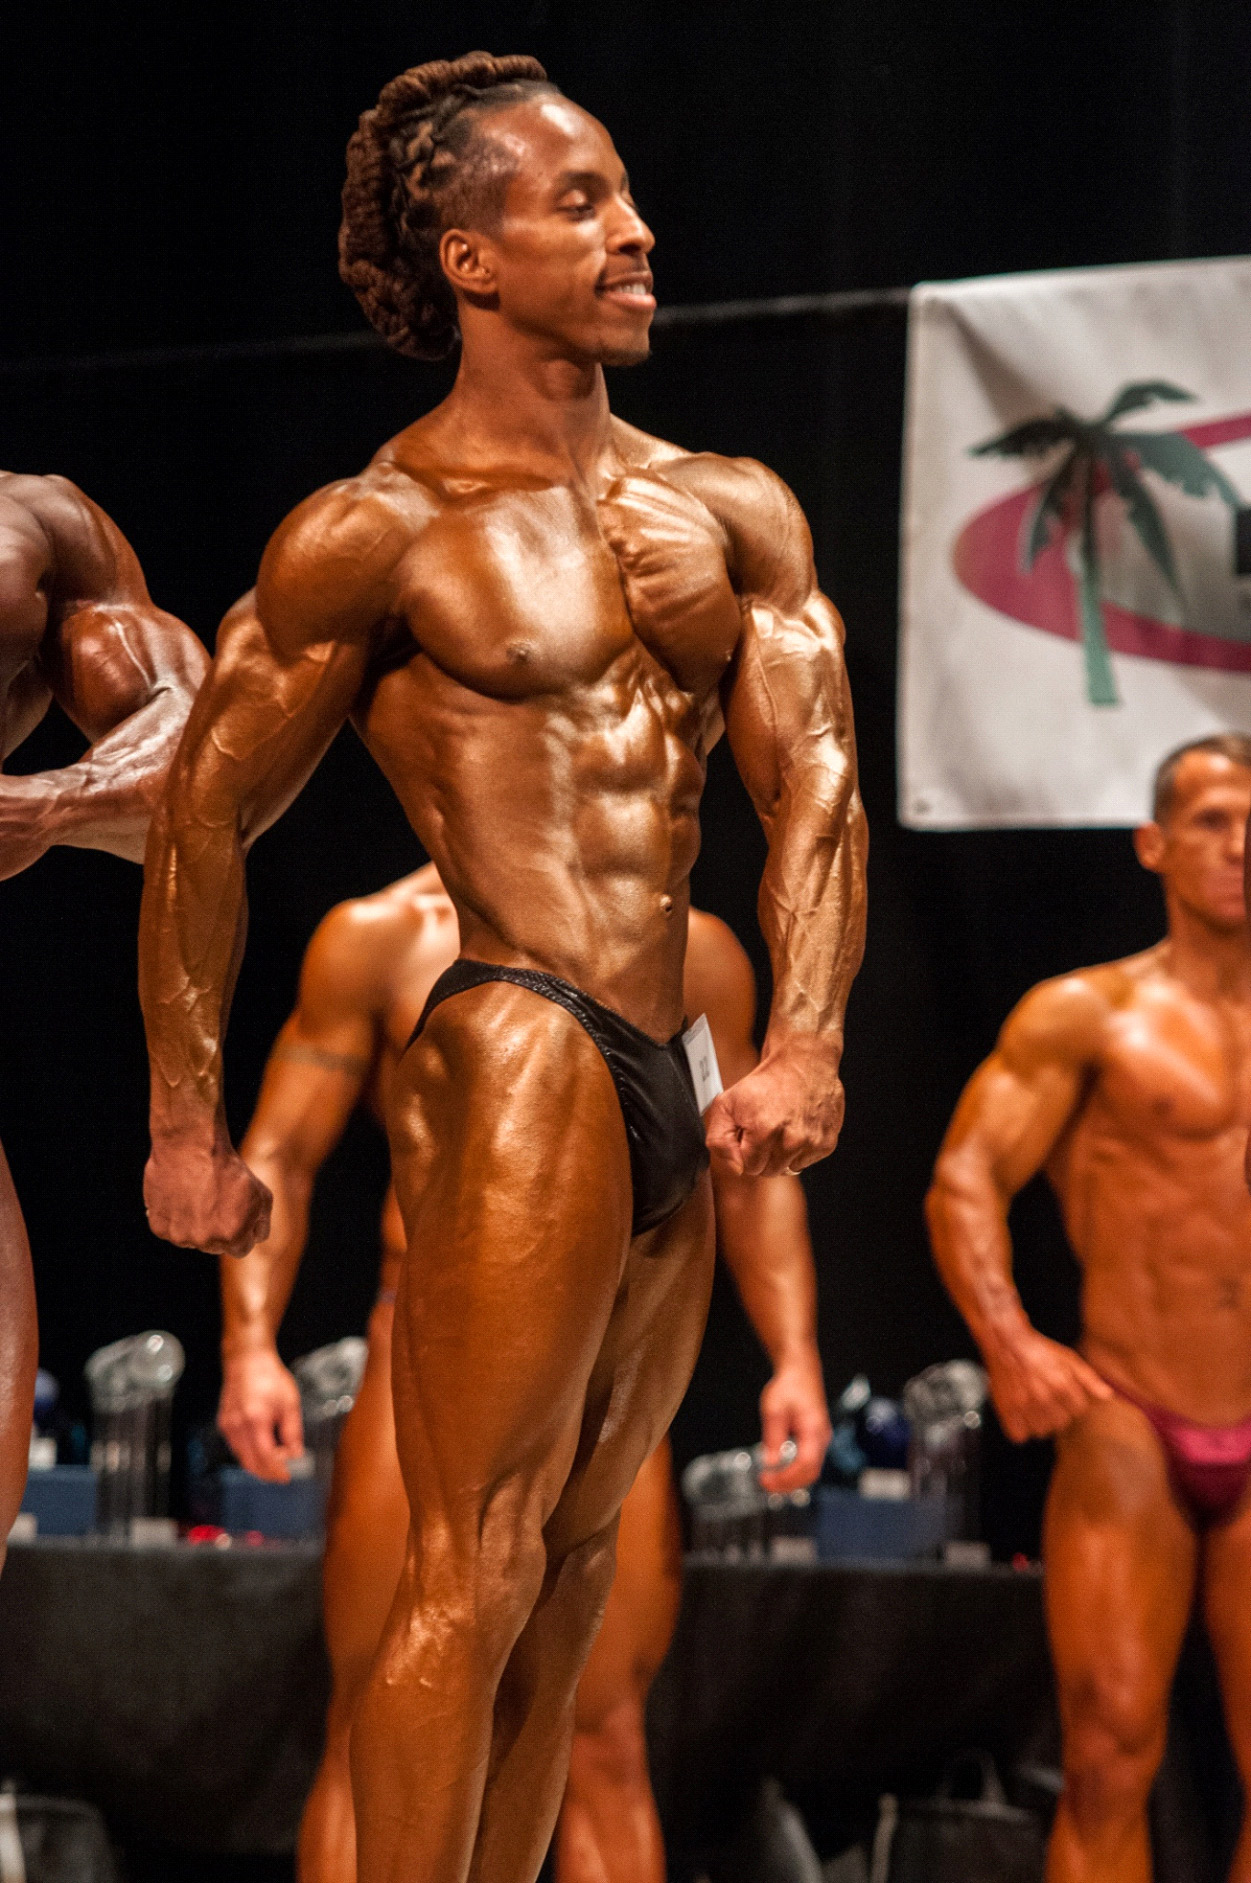 No mirror VS mirror. Antoine done messed up his front relaxed! : r/ bodybuilding